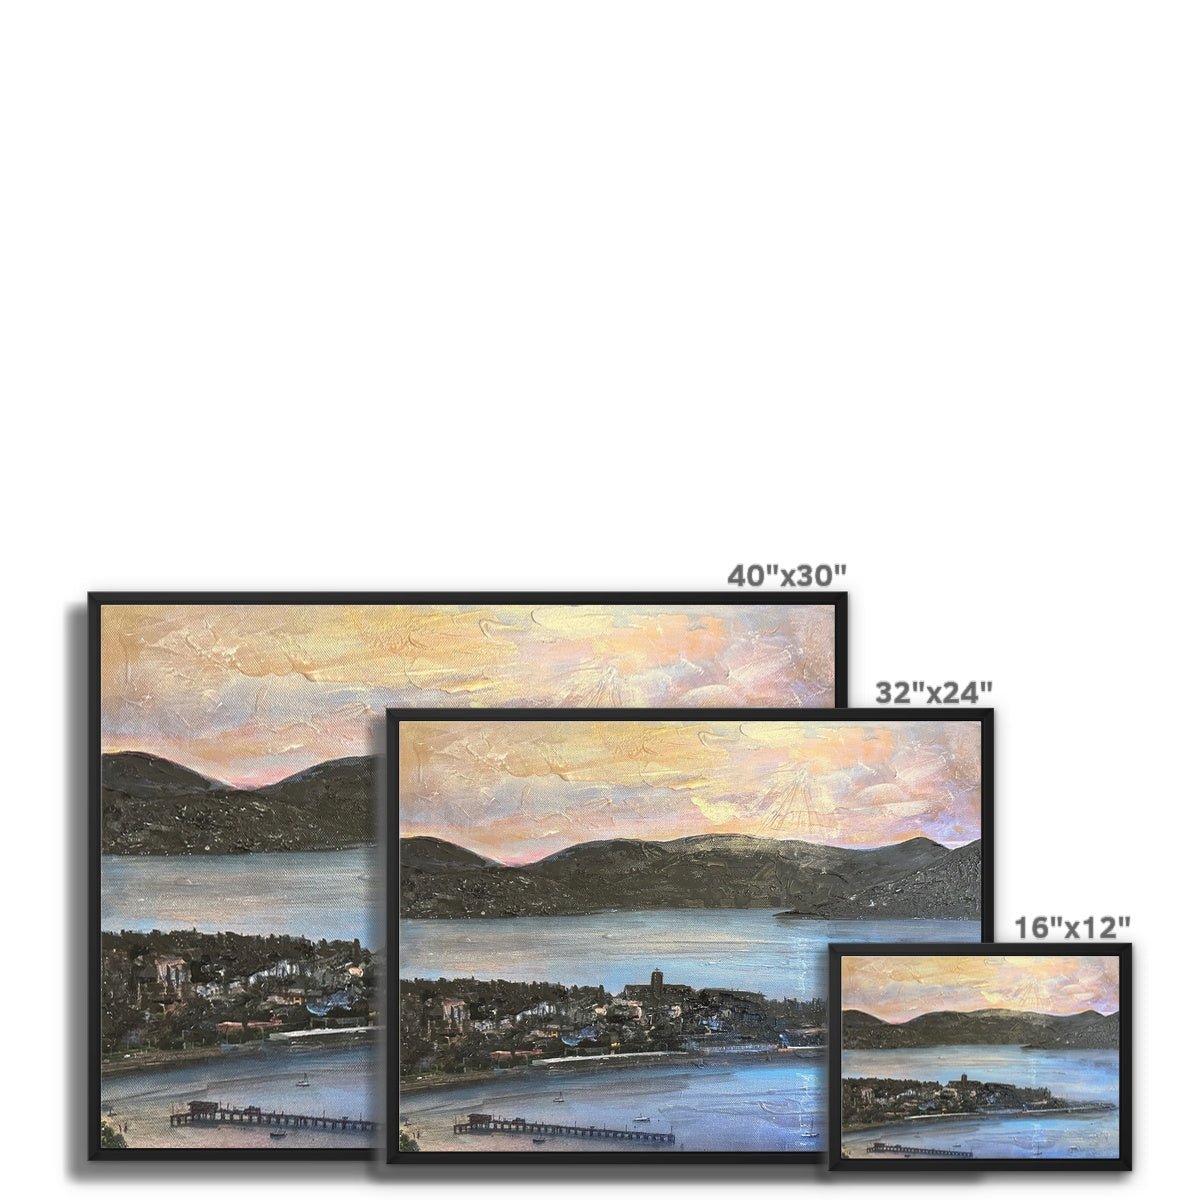 From Lyle Hill Painting | Framed Canvas From Scotland-Floating Framed Canvas Prints-River Clyde Art Gallery-Paintings, Prints, Homeware, Art Gifts From Scotland By Scottish Artist Kevin Hunter